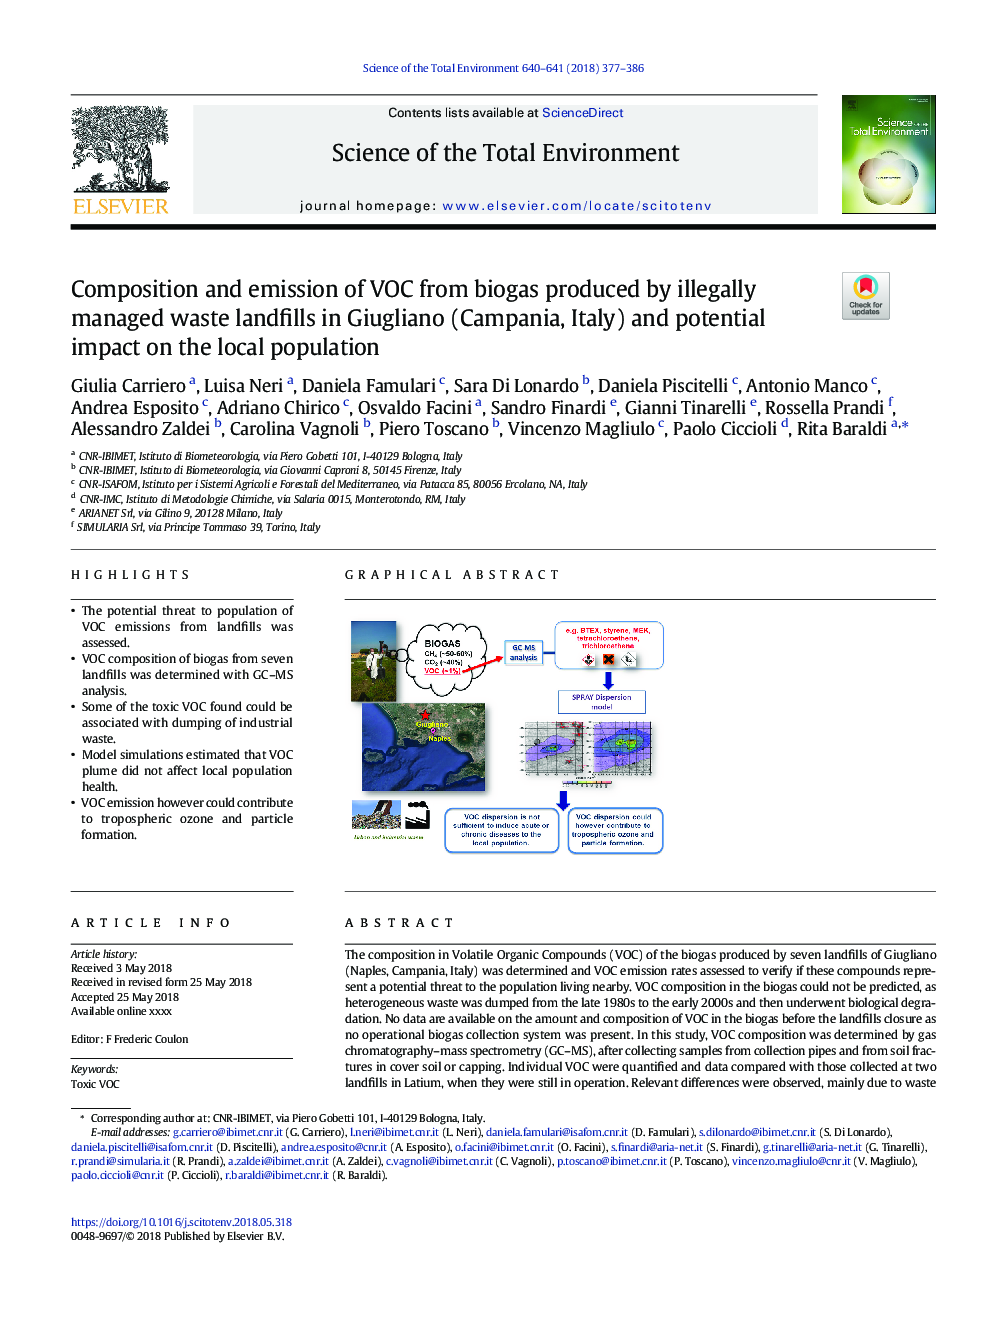 Composition and emission of VOC from biogas produced by illegally managed waste landfills in Giugliano (Campania, Italy) and potential impact on the local population